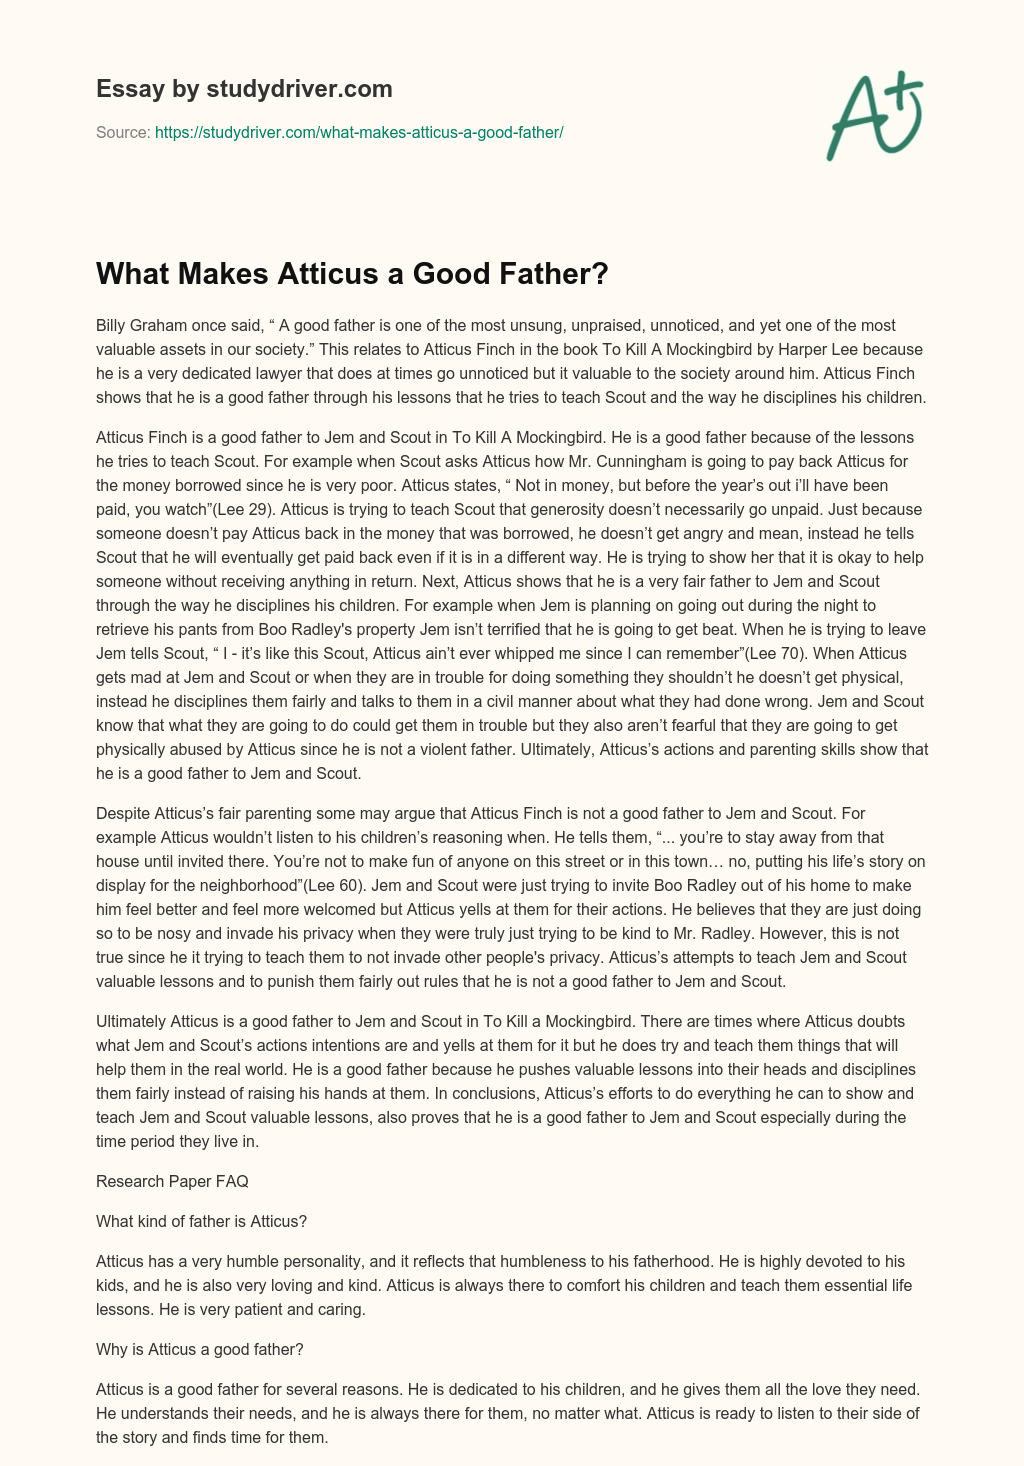 What Makes Atticus a Good Father? essay